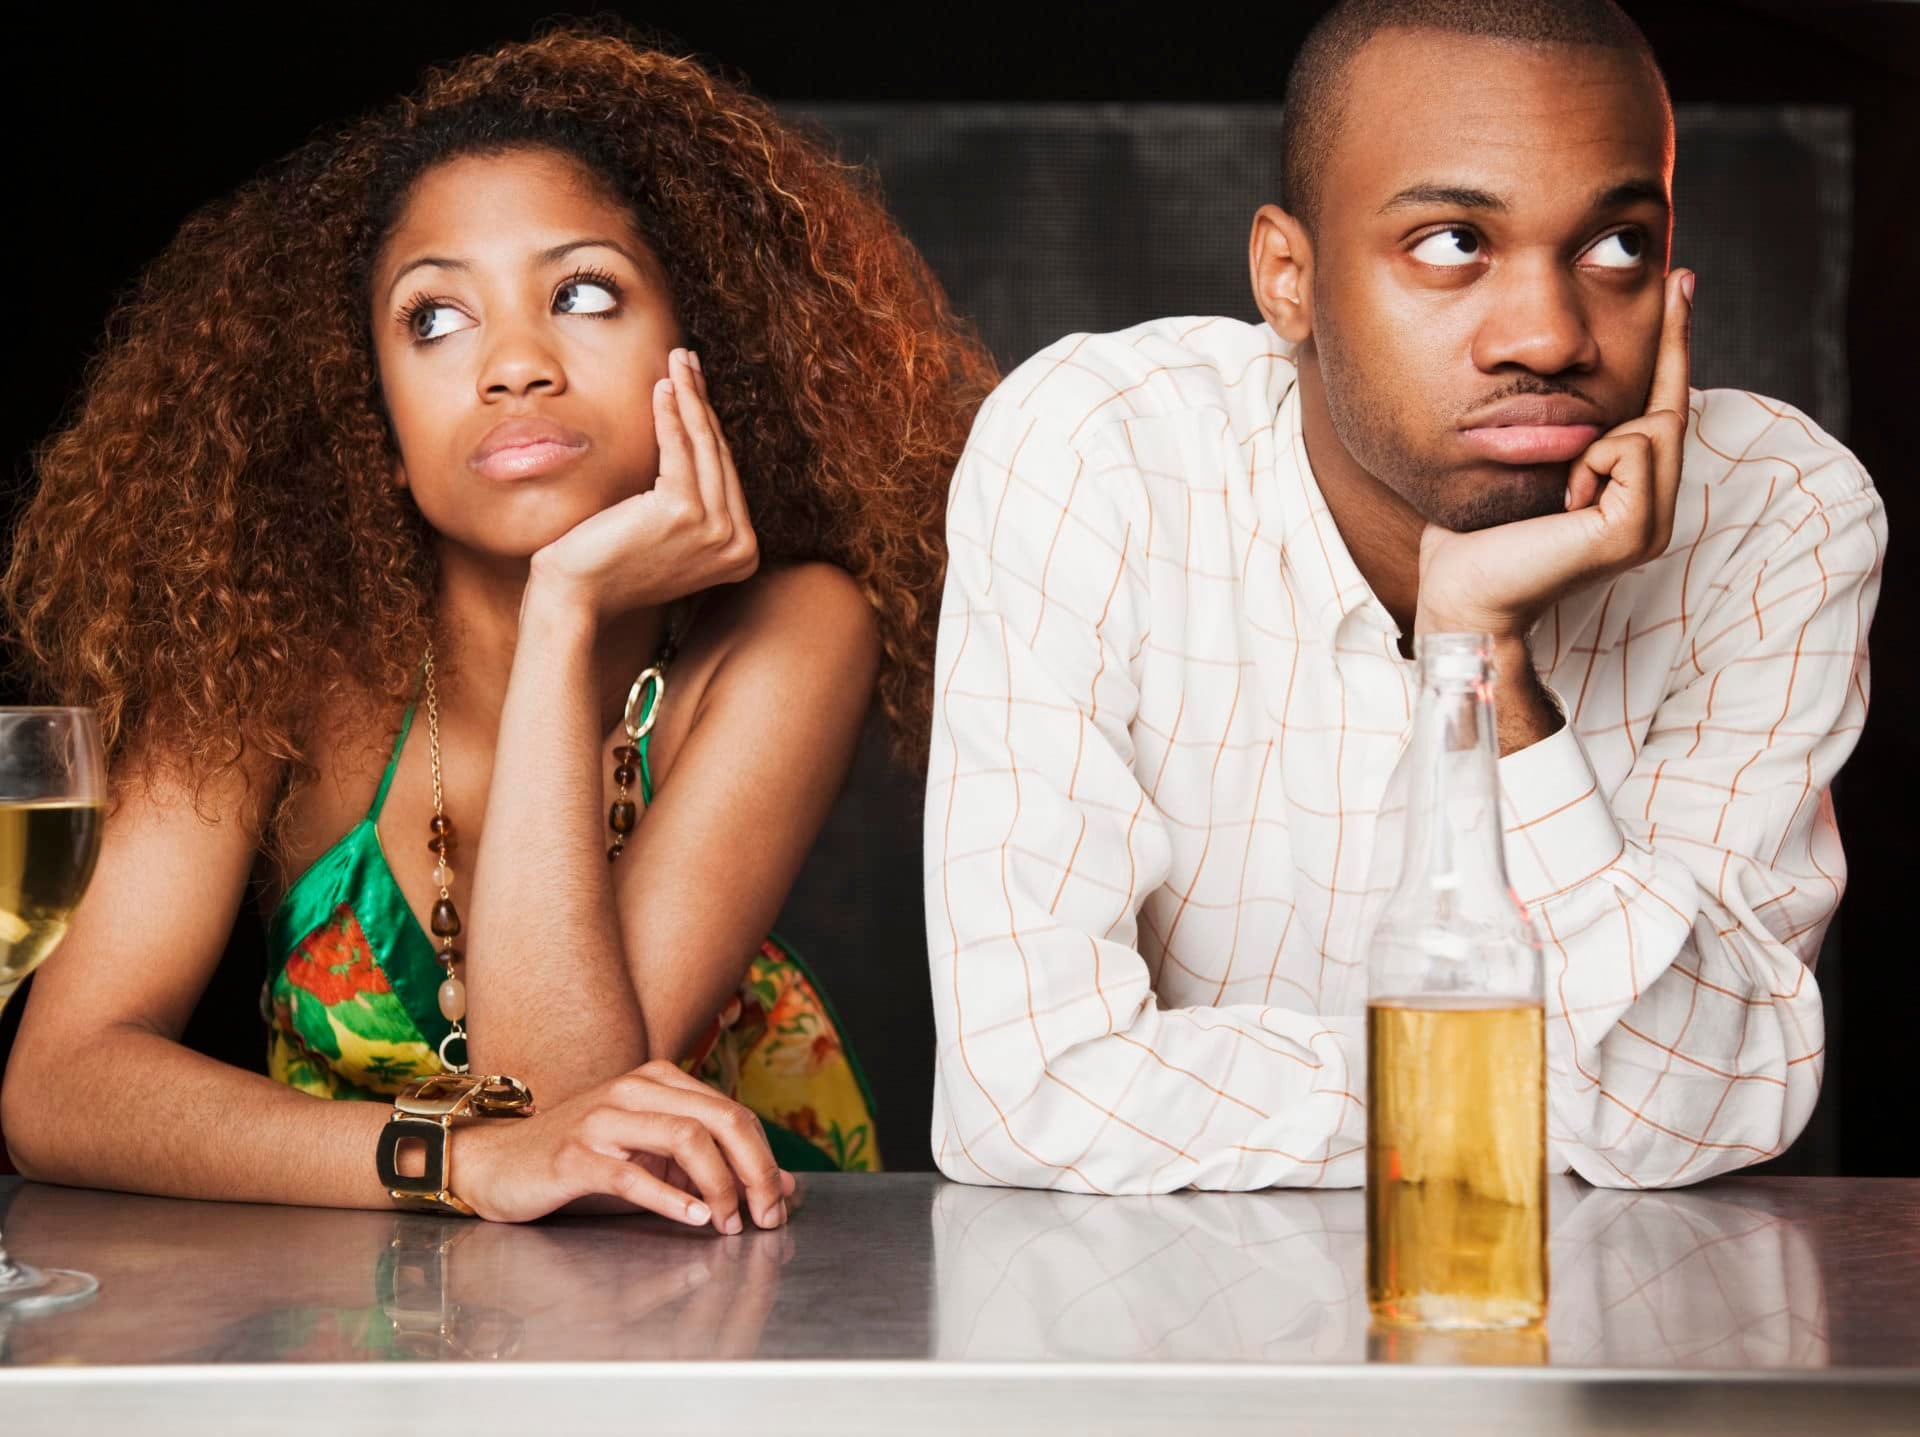 To The Left! How To Tell When You’ve Reached A Relationship Dead End